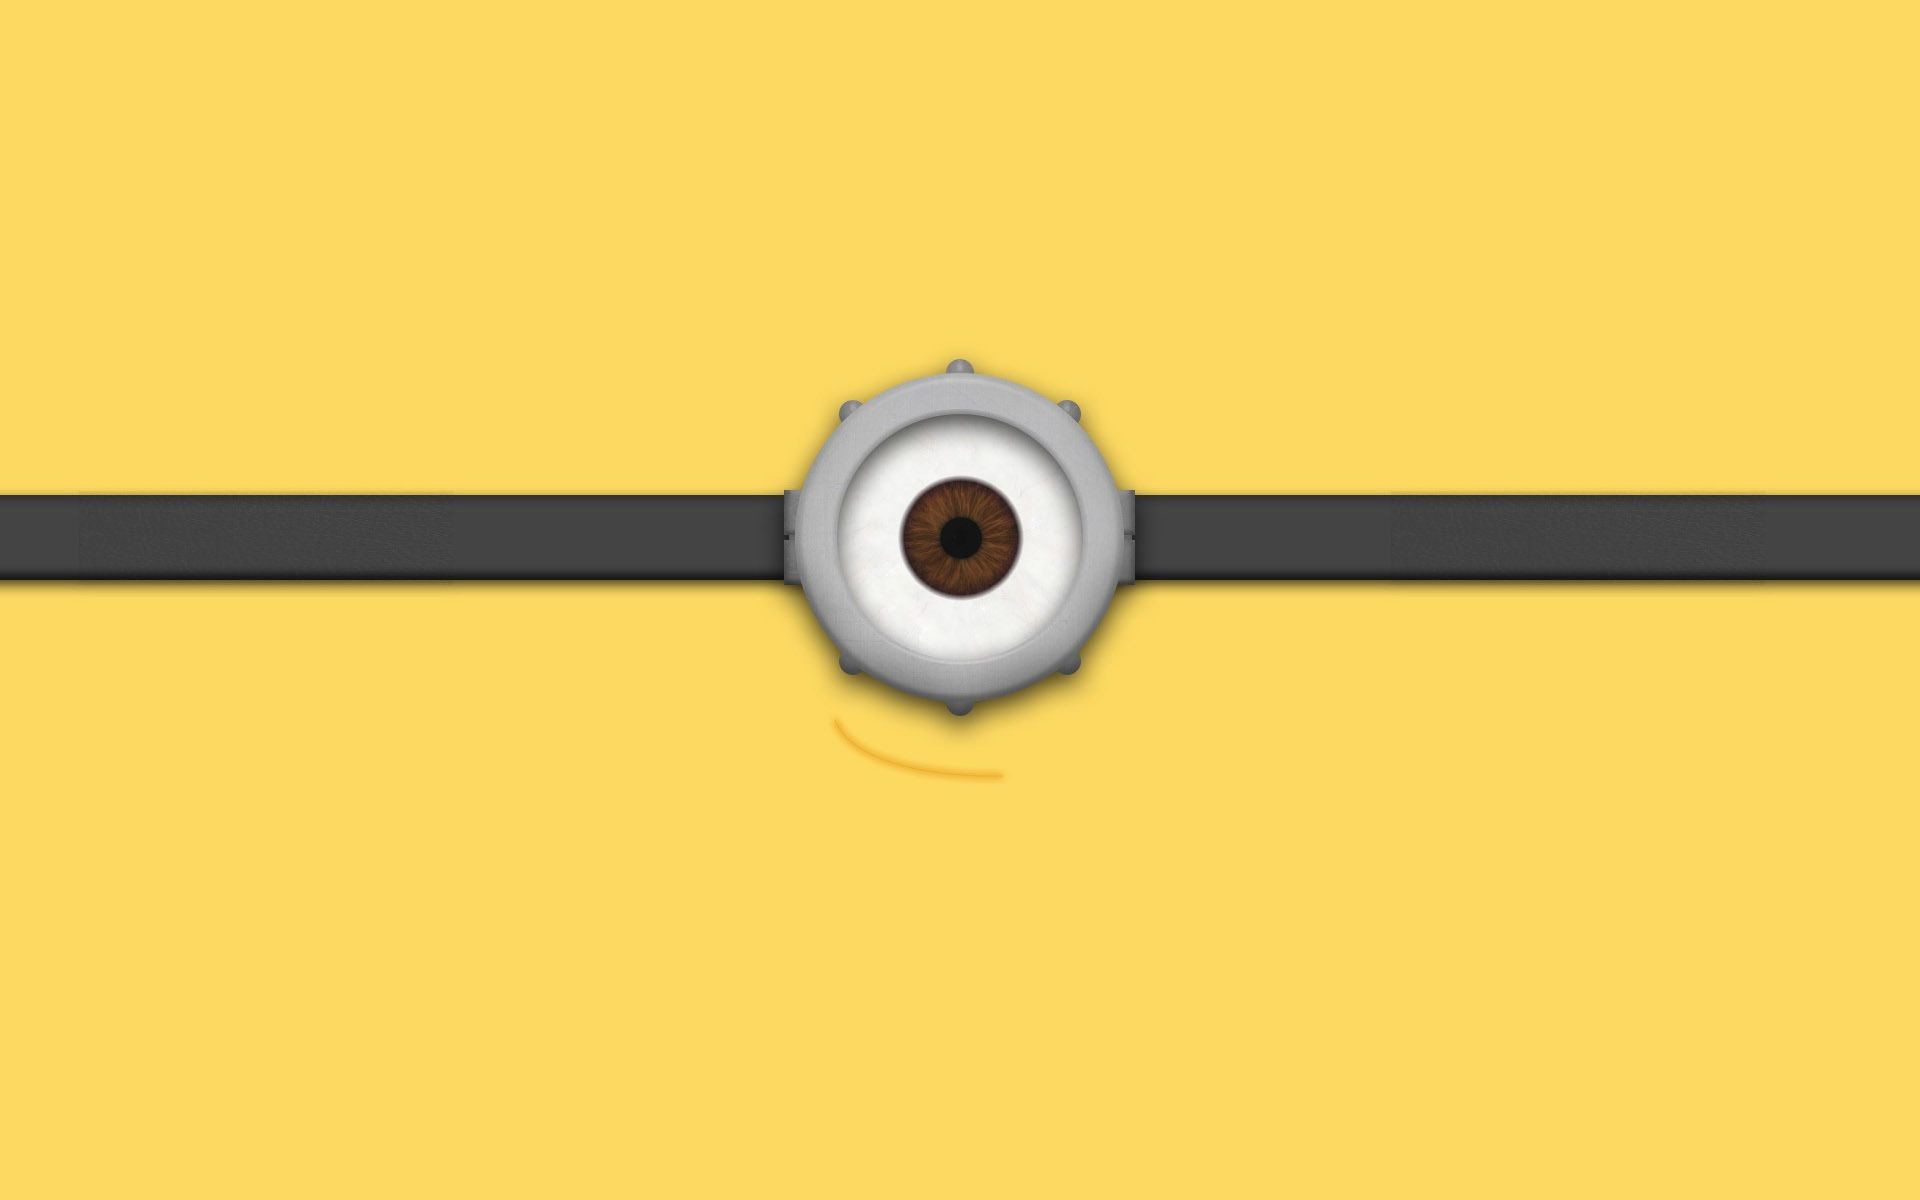 1920x1200 Awesome minions backgrounds hd free download